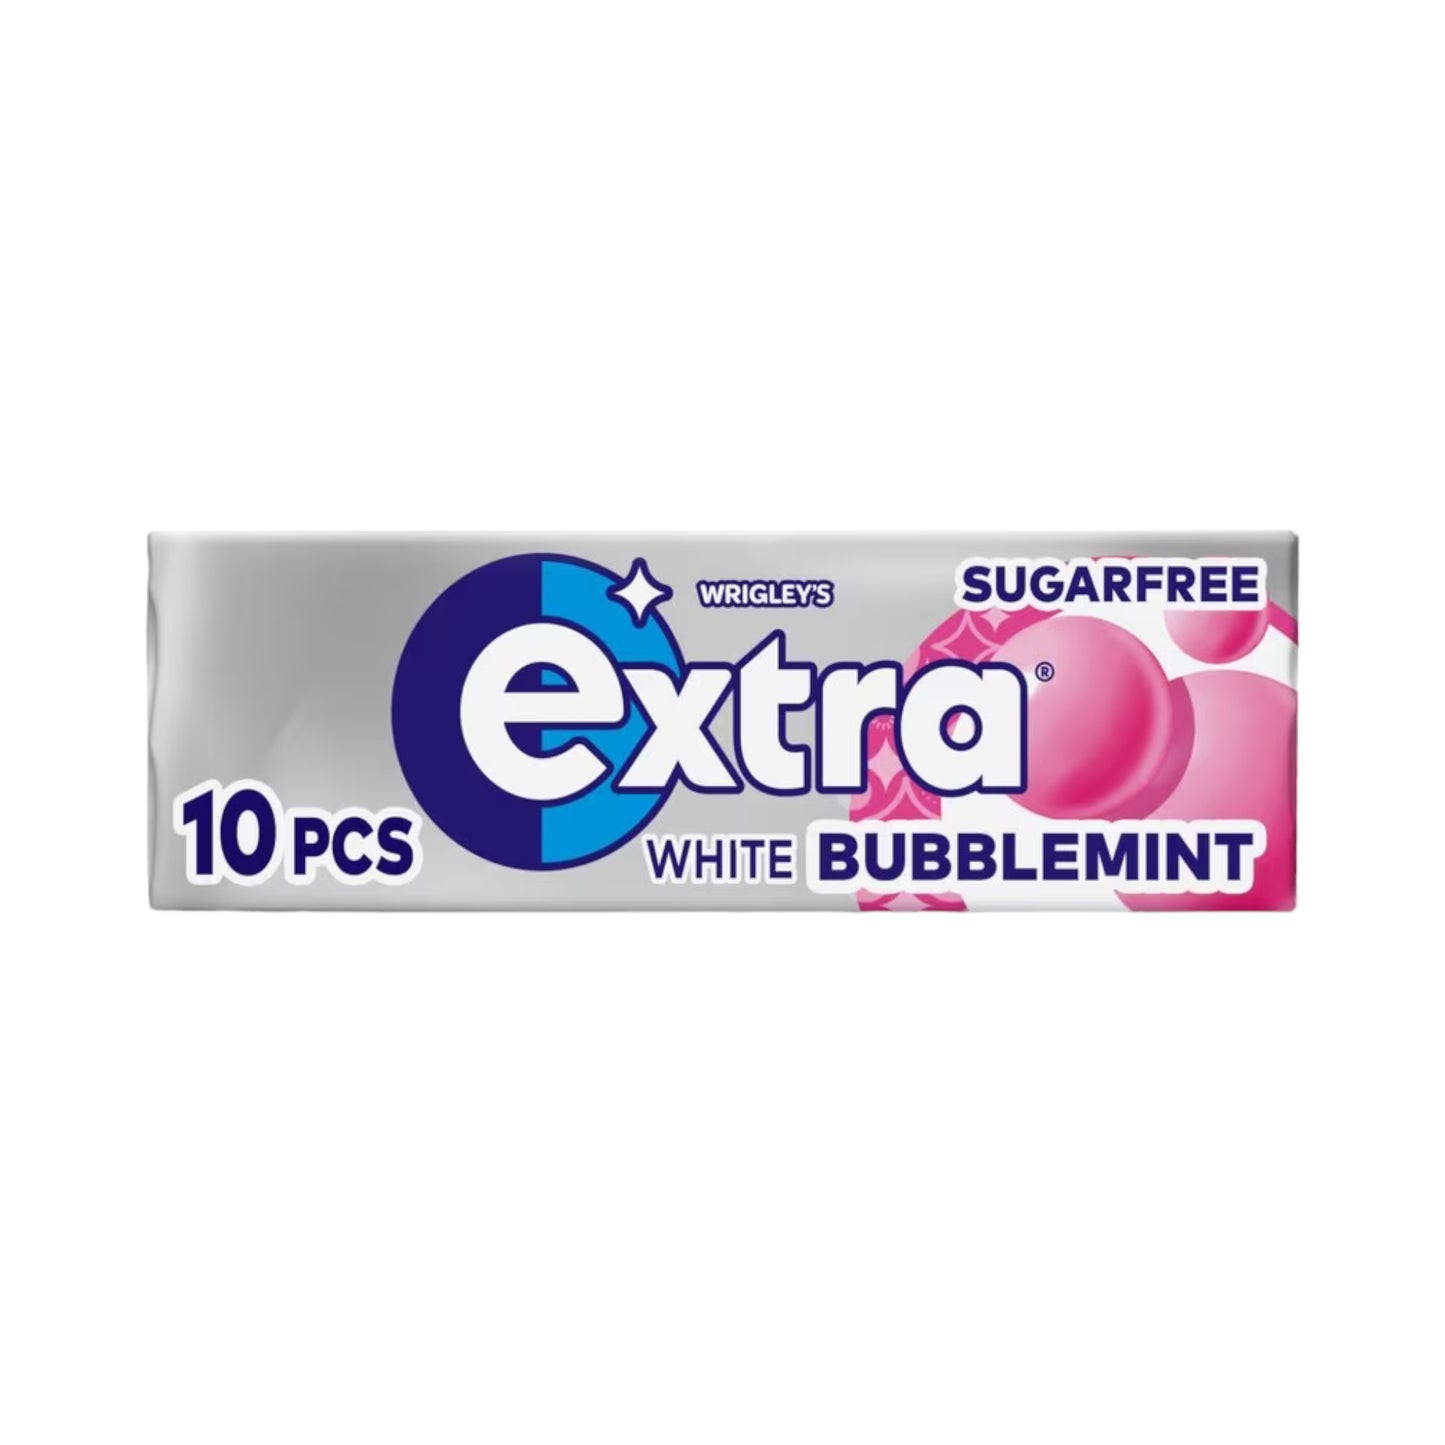 Wrigley's Extra White Bubblemint Sugarfree Chewing Gum - 14g